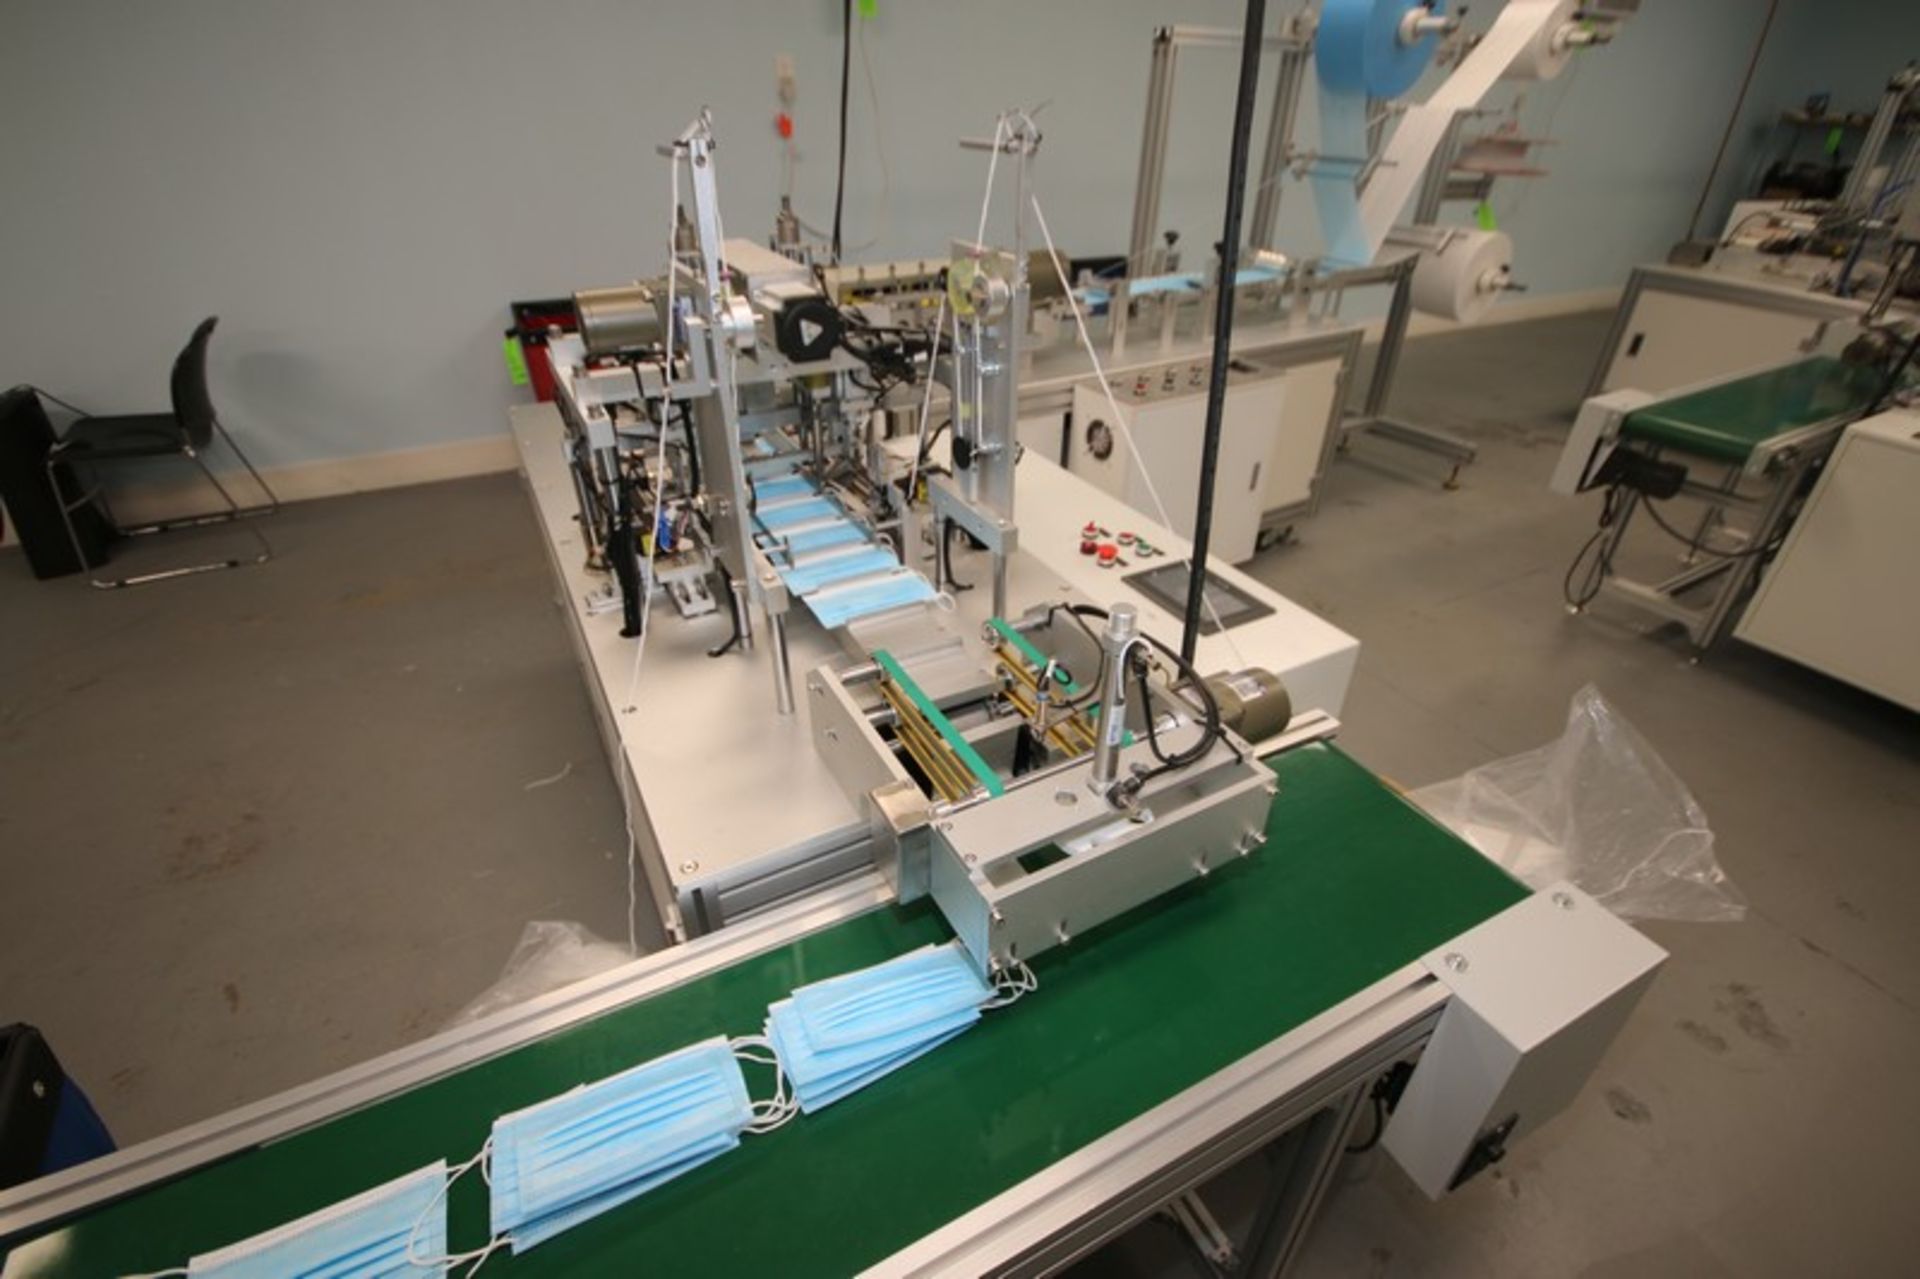 Ultra-Sonic Spindle Medical Mask Manufacturing Machine, with Spindle Rack Containing Top Laying, - Image 12 of 19